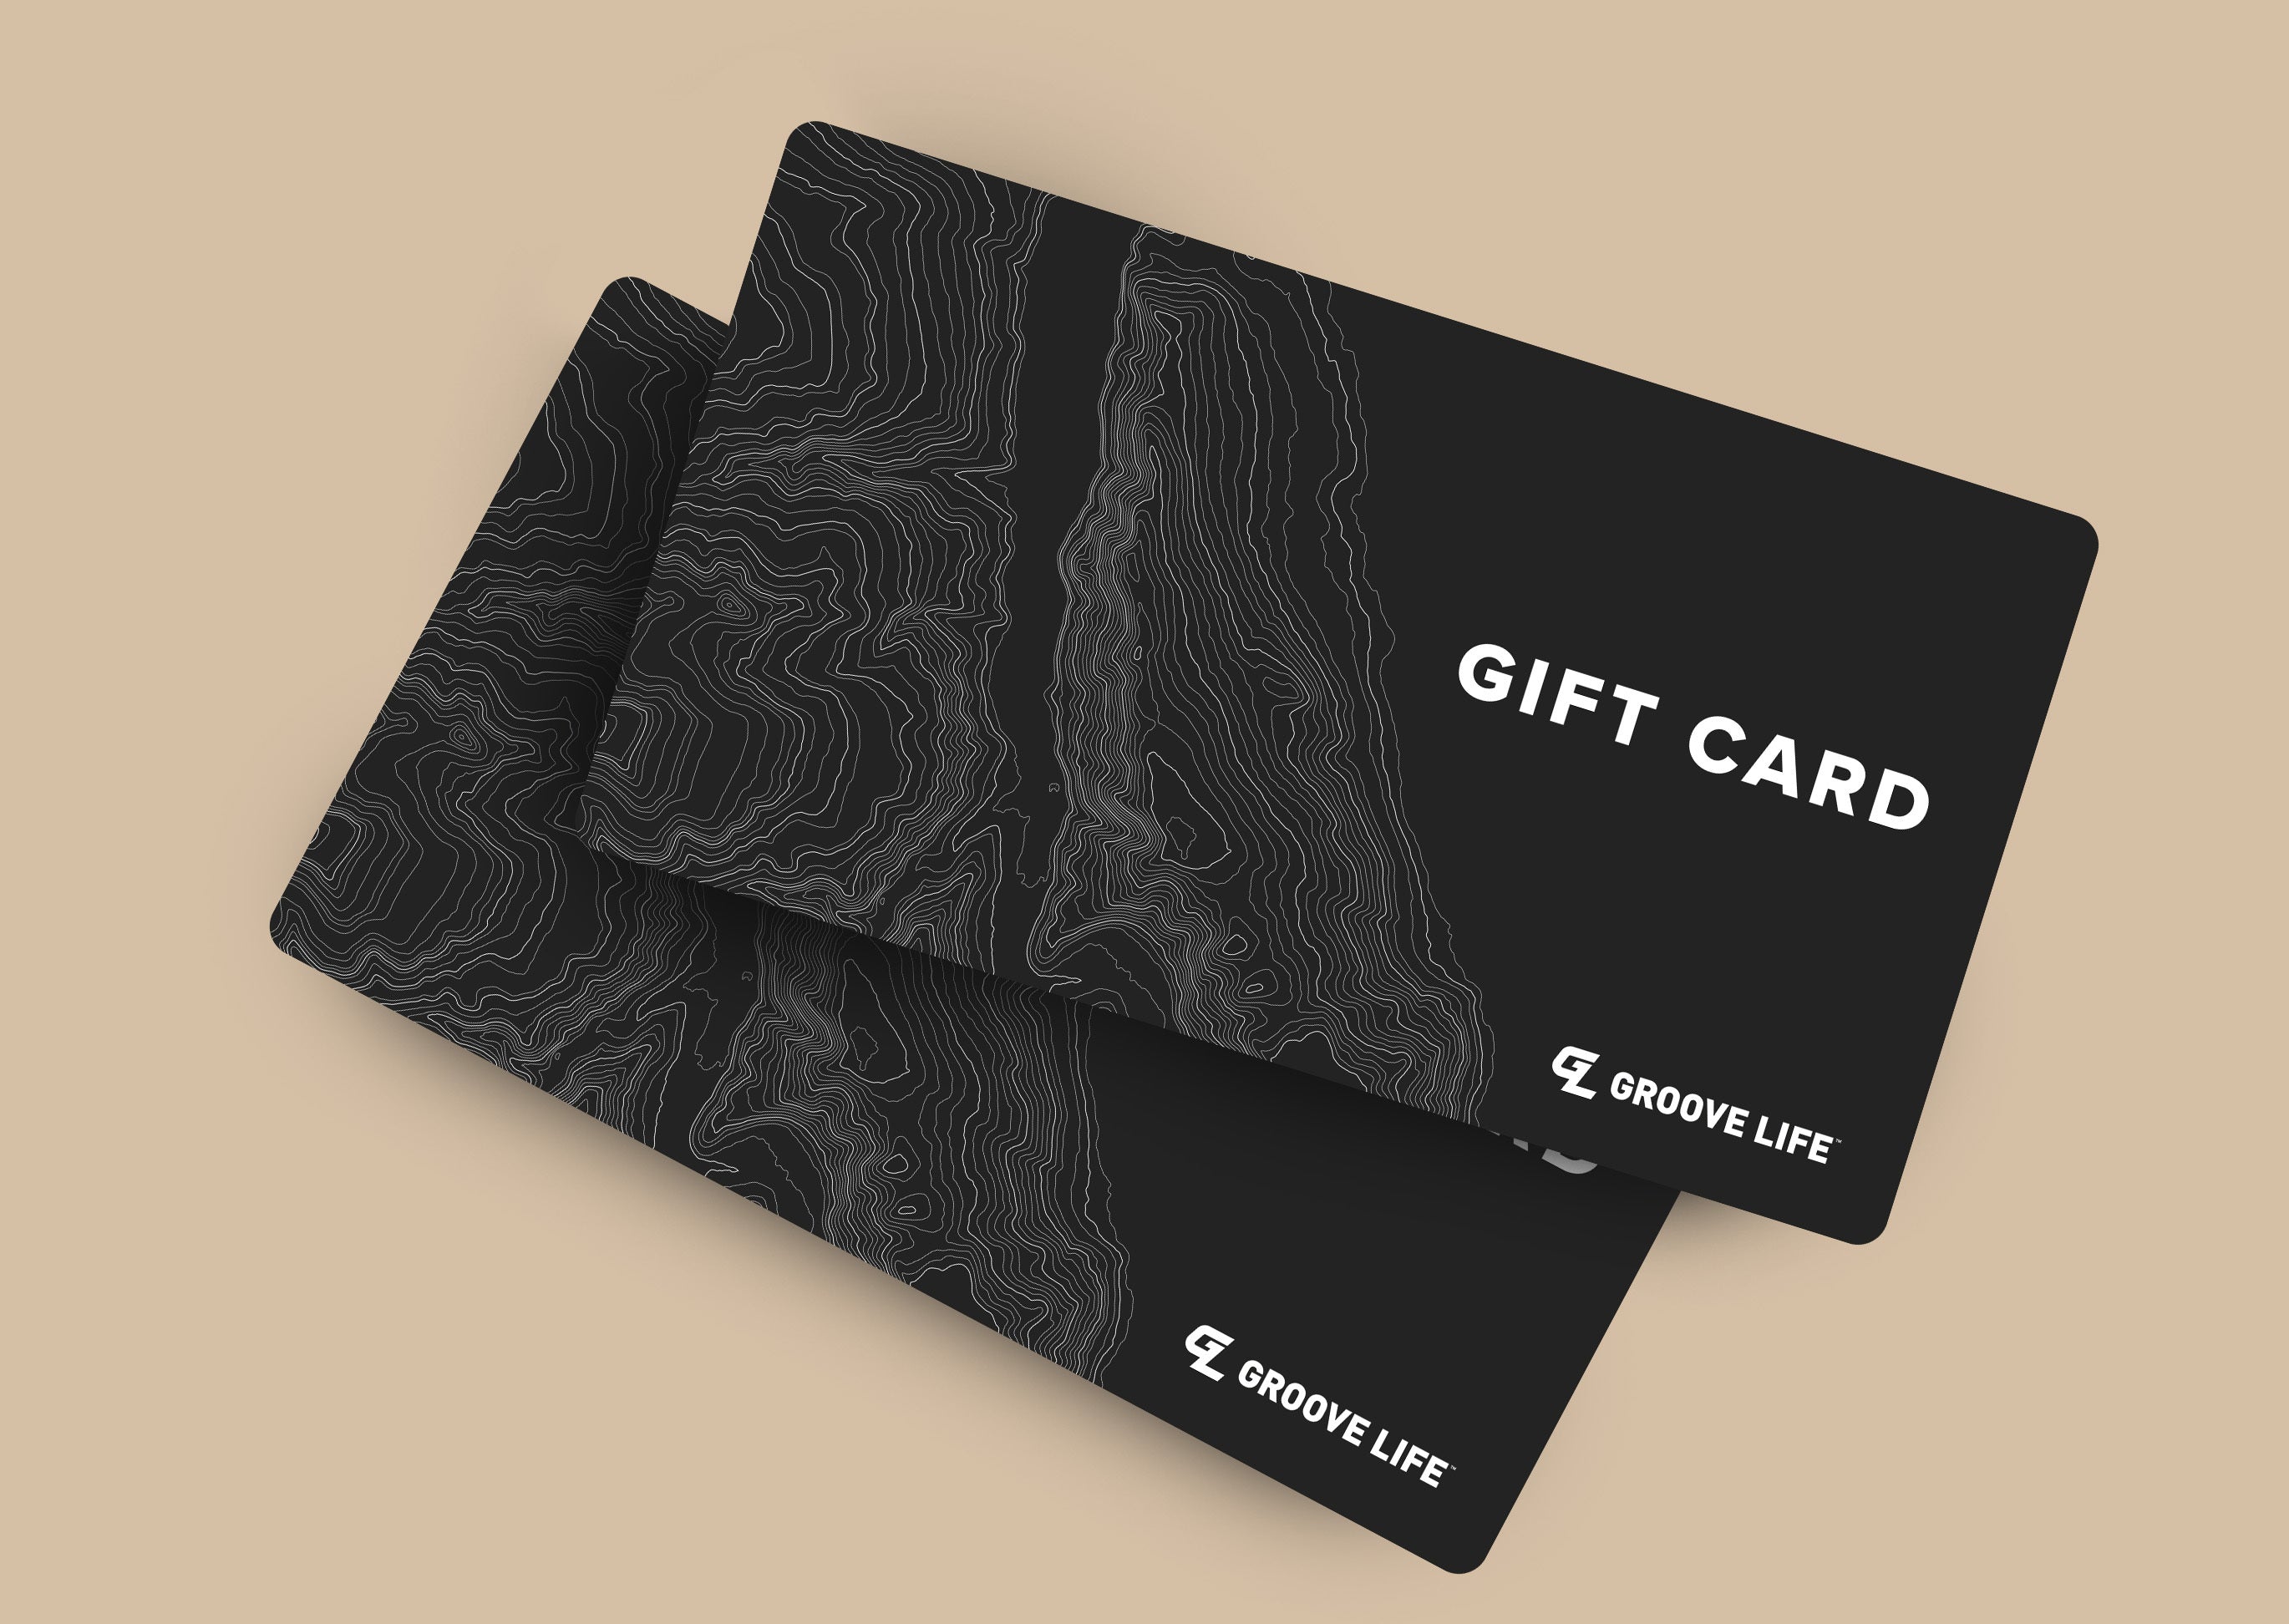 image of Groove Life gift cards